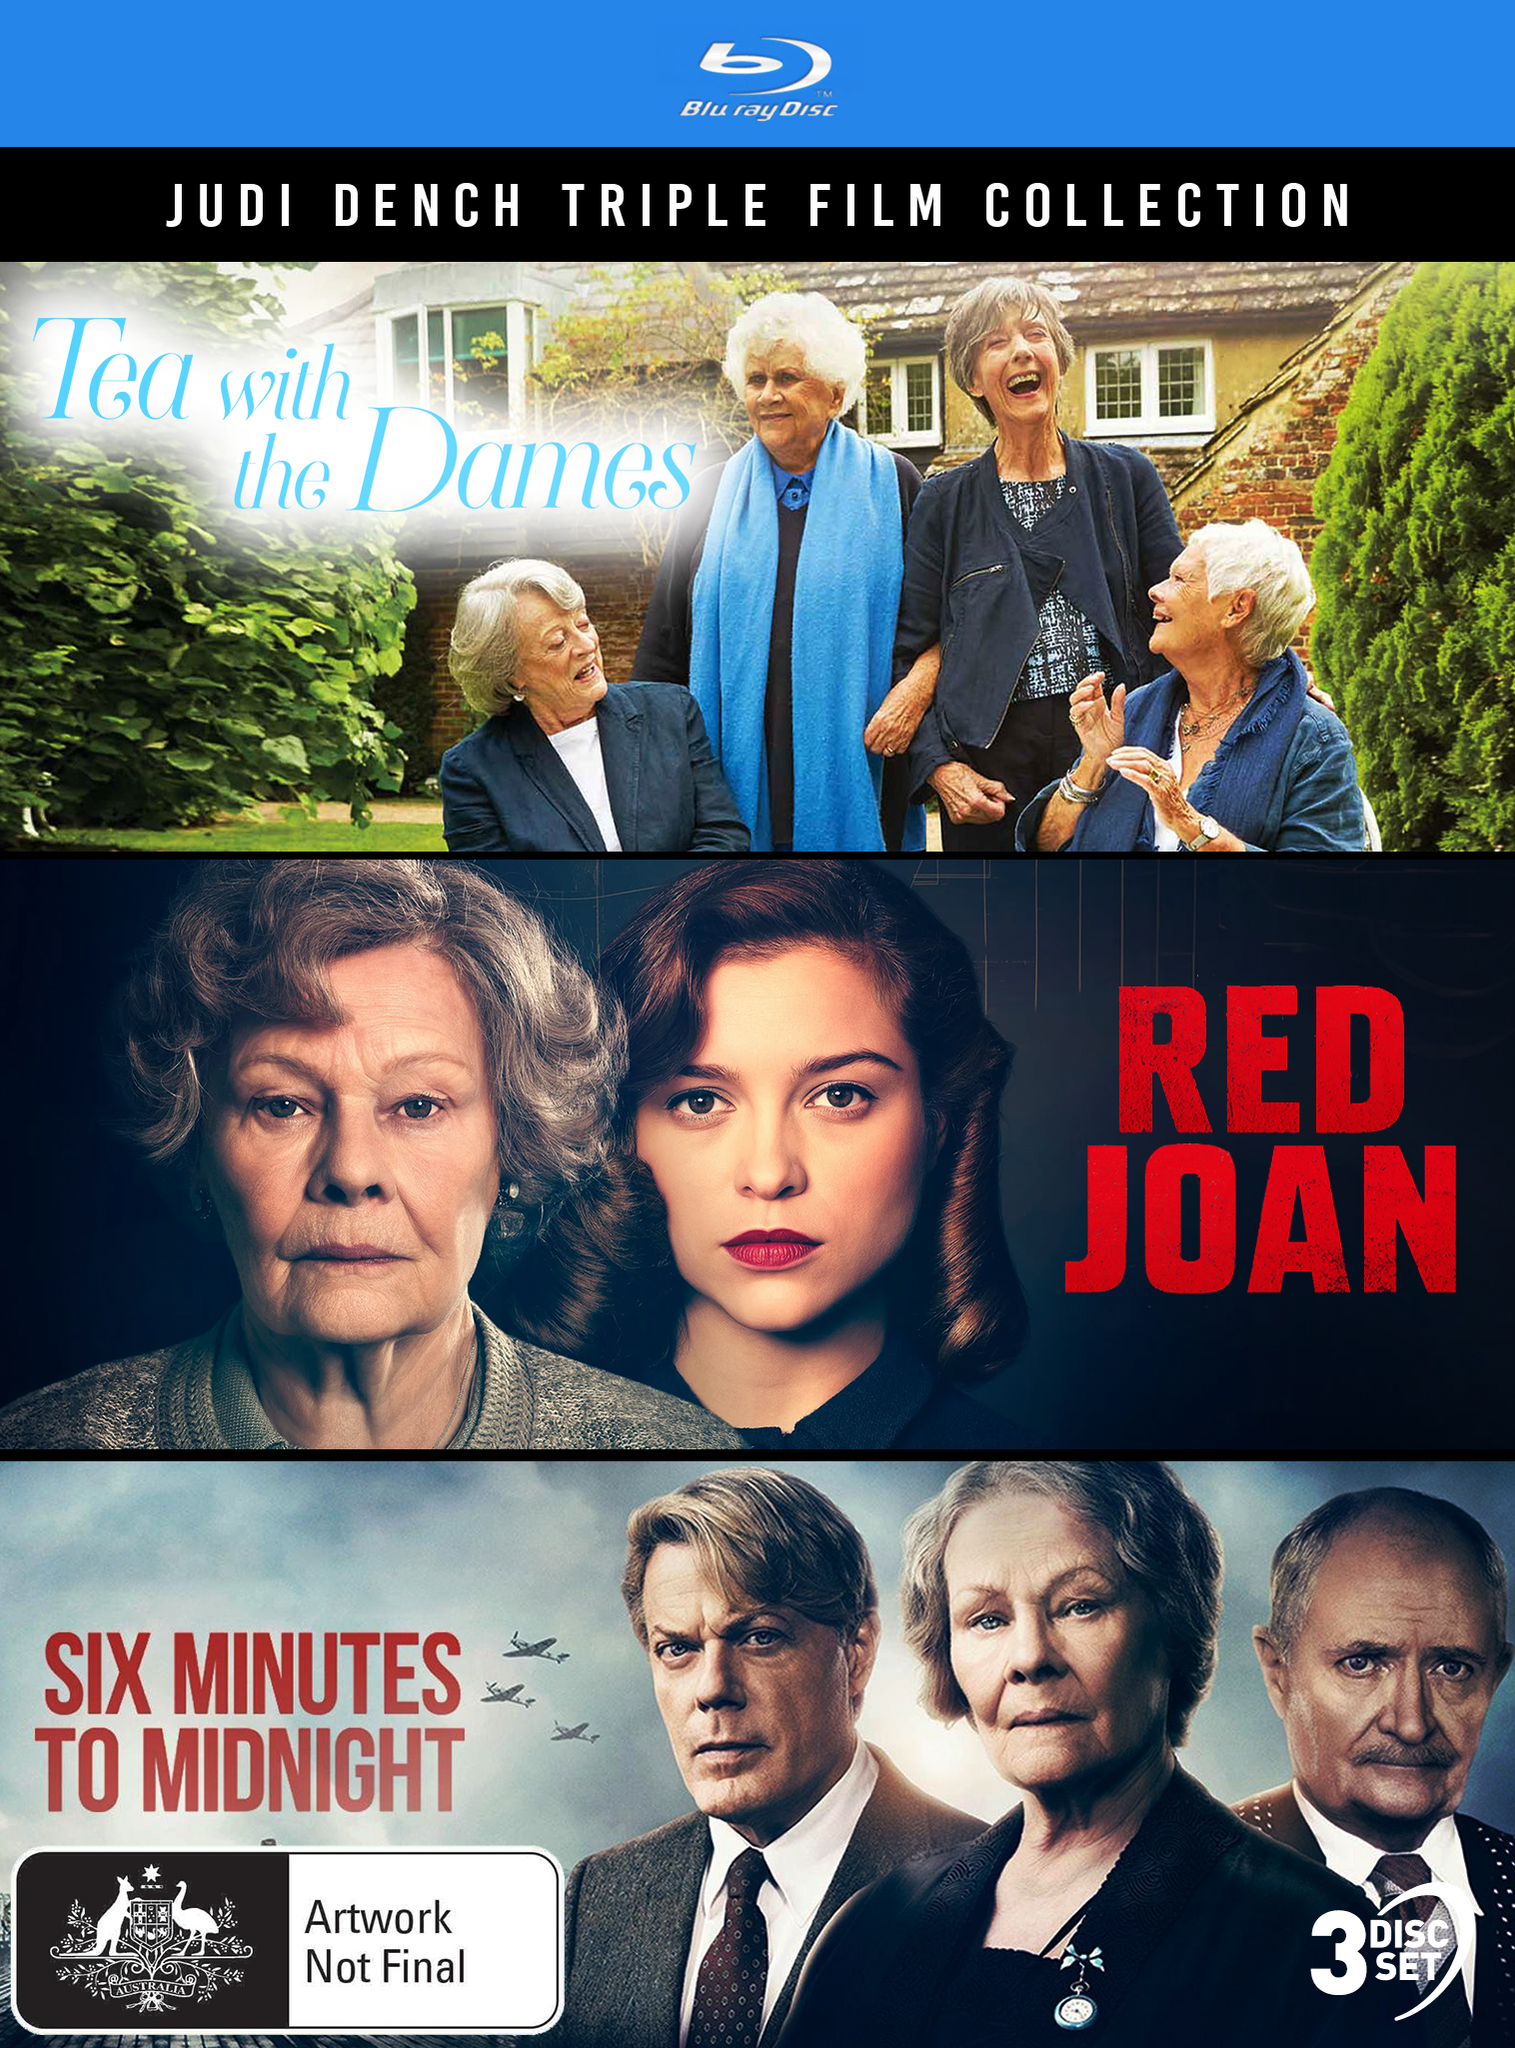 JUDI DENCH: TRIPLE FILM COLLECTION (TEA WITH THE DAMES / RED JOAN / SIX MINUTES TO MIDNIGHT) - SPECIAL EDITION BLU-RAY